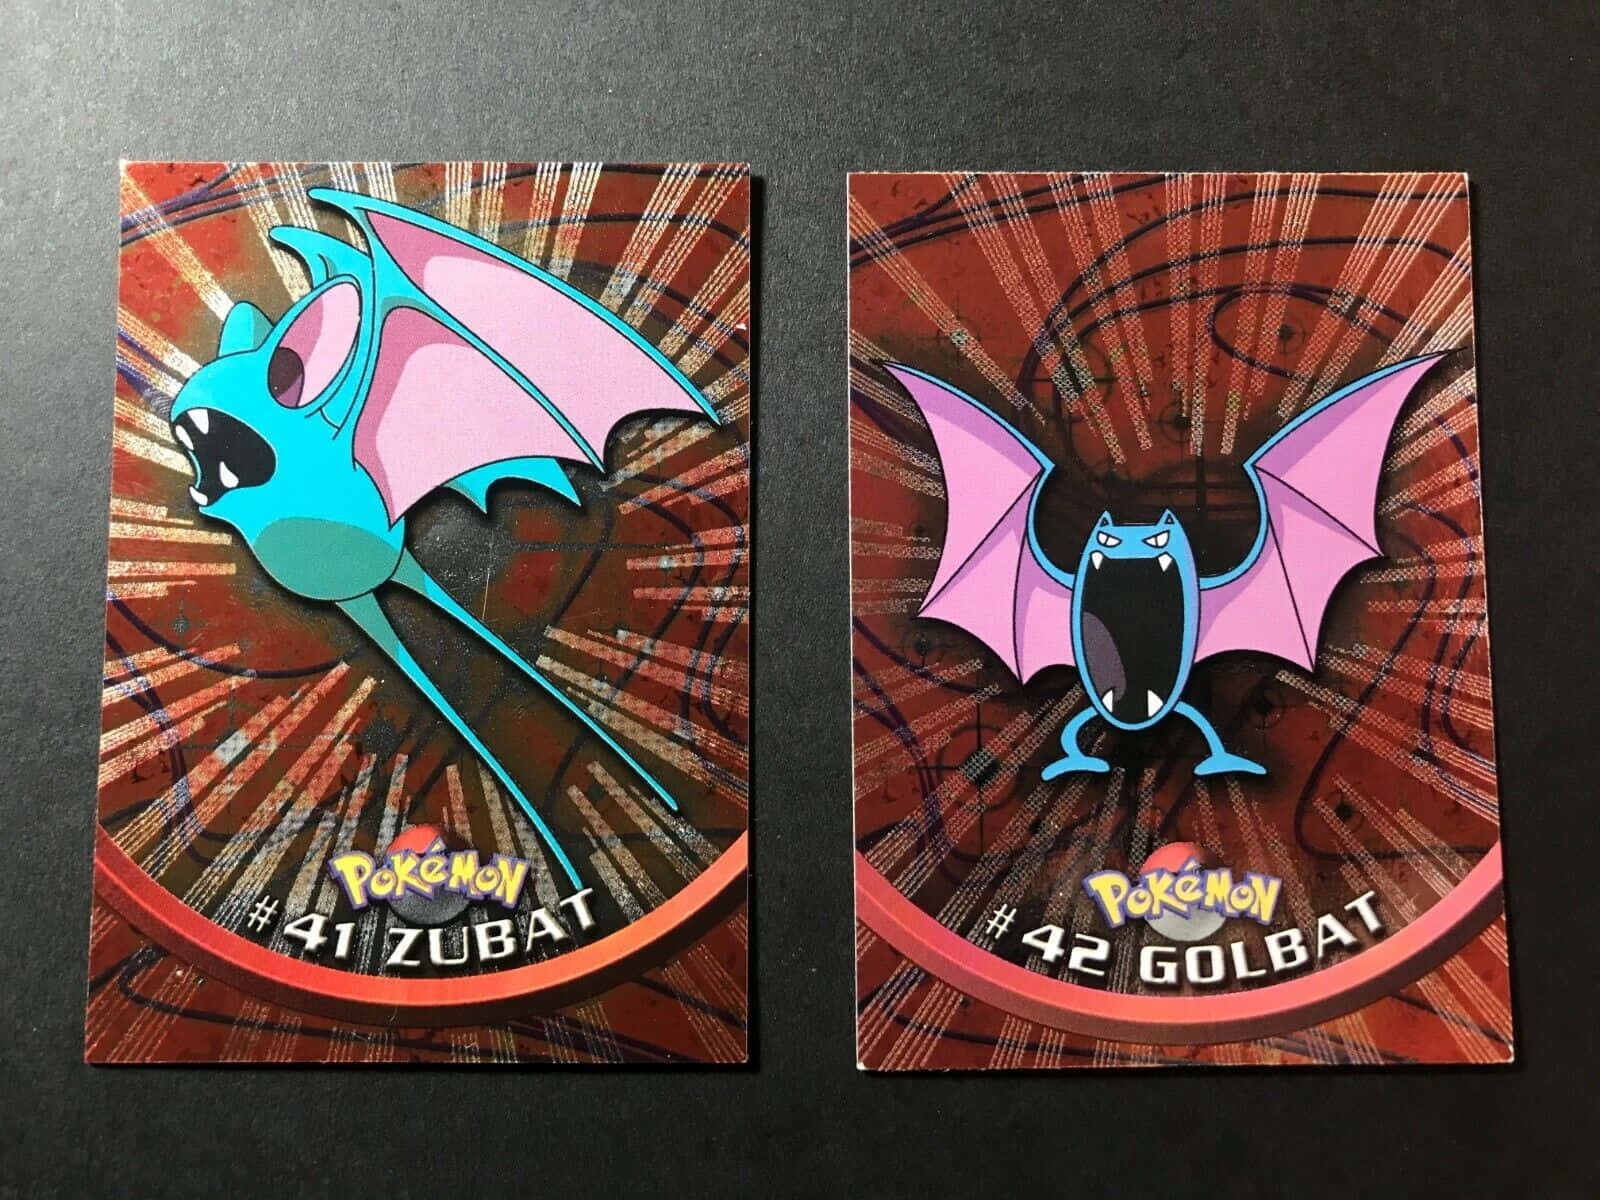 Golbatoch Zubat-kort. (this Sentence Does Not Change In Context Of Computer Or Mobile Wallpaper, As It Simply States The Name Of The Cards In Swedish.) Wallpaper